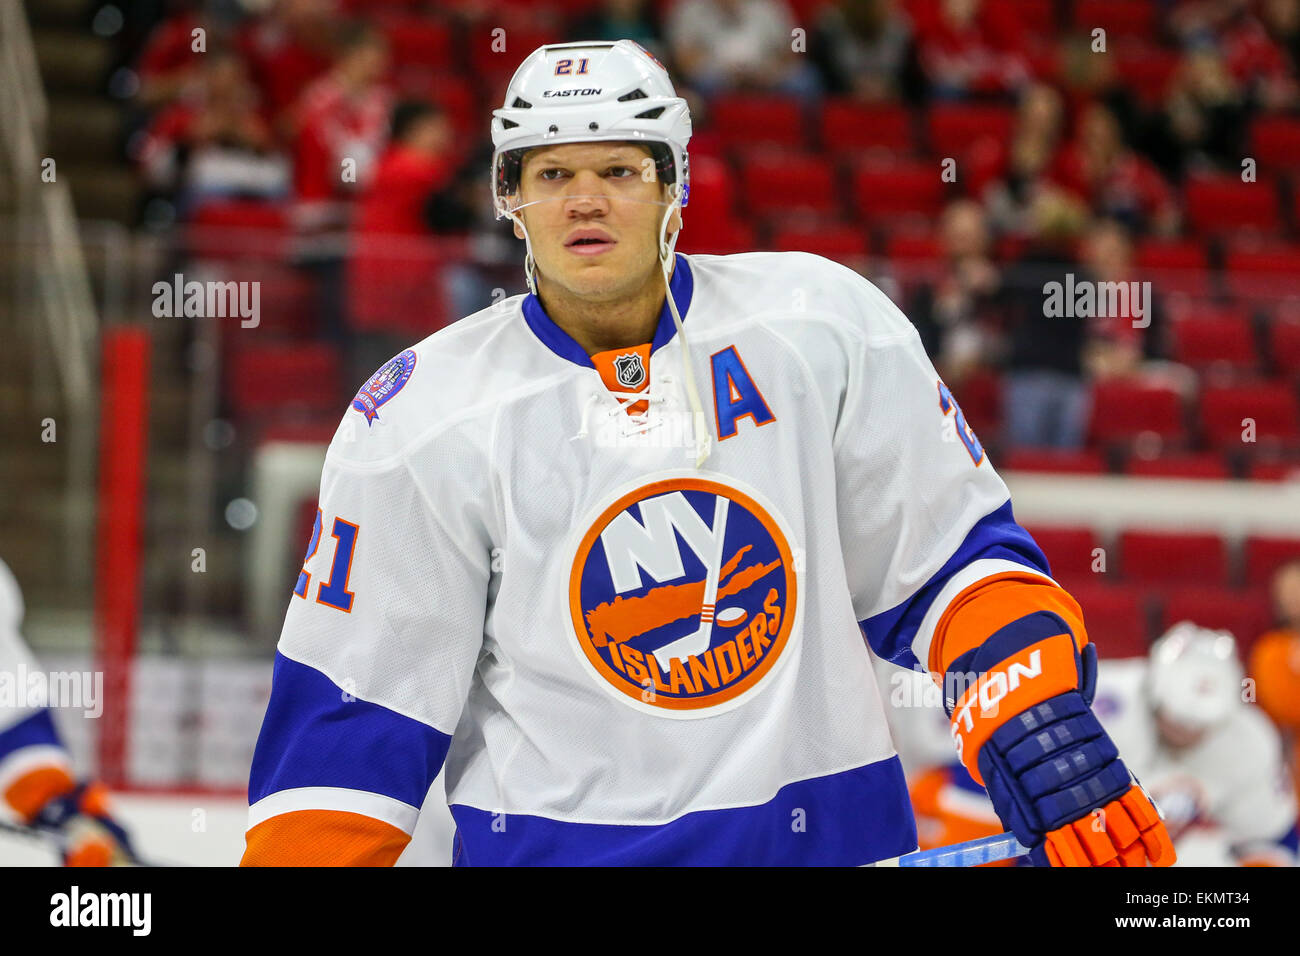 Kyle Okposo (21) during the NHL game 